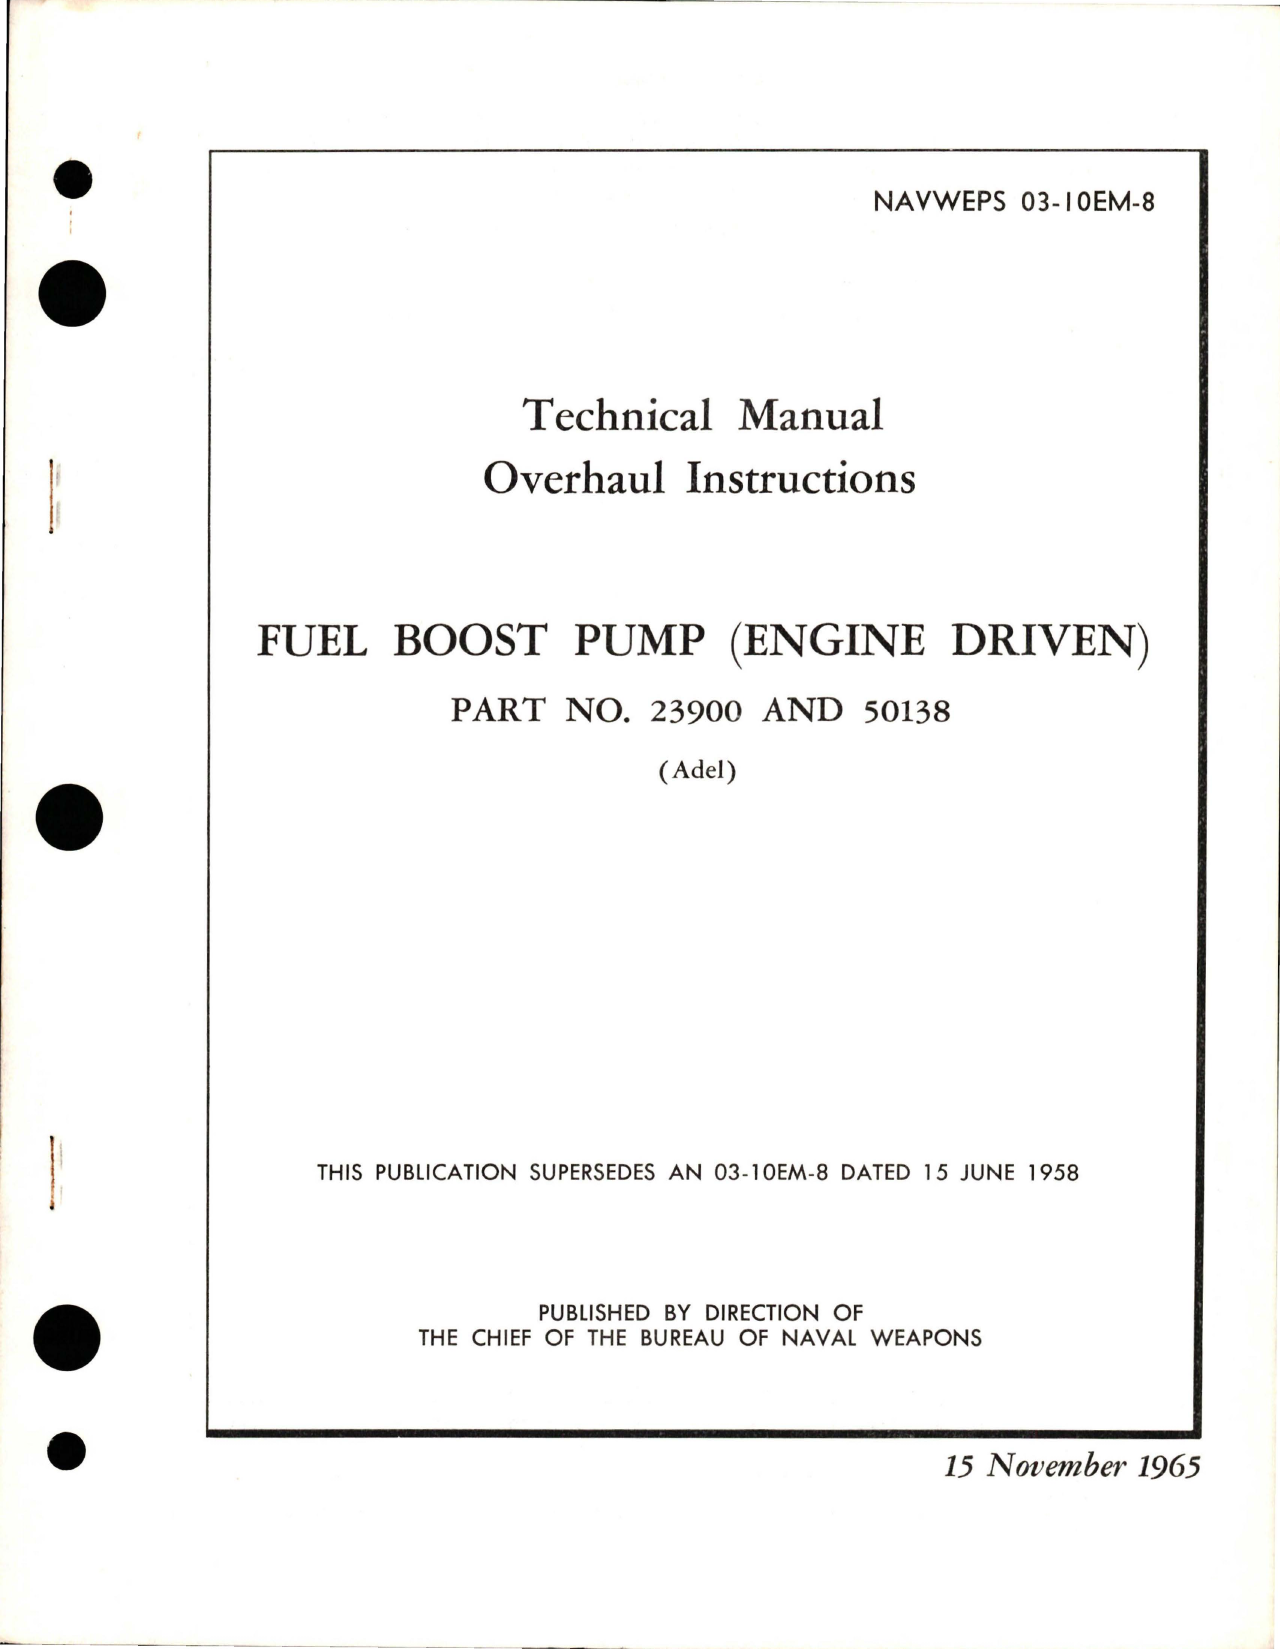 Sample page 1 from AirCorps Library document: Overhaul Instructions for Engine Driven Fuel Boost Pump - Part 23900 and 50138